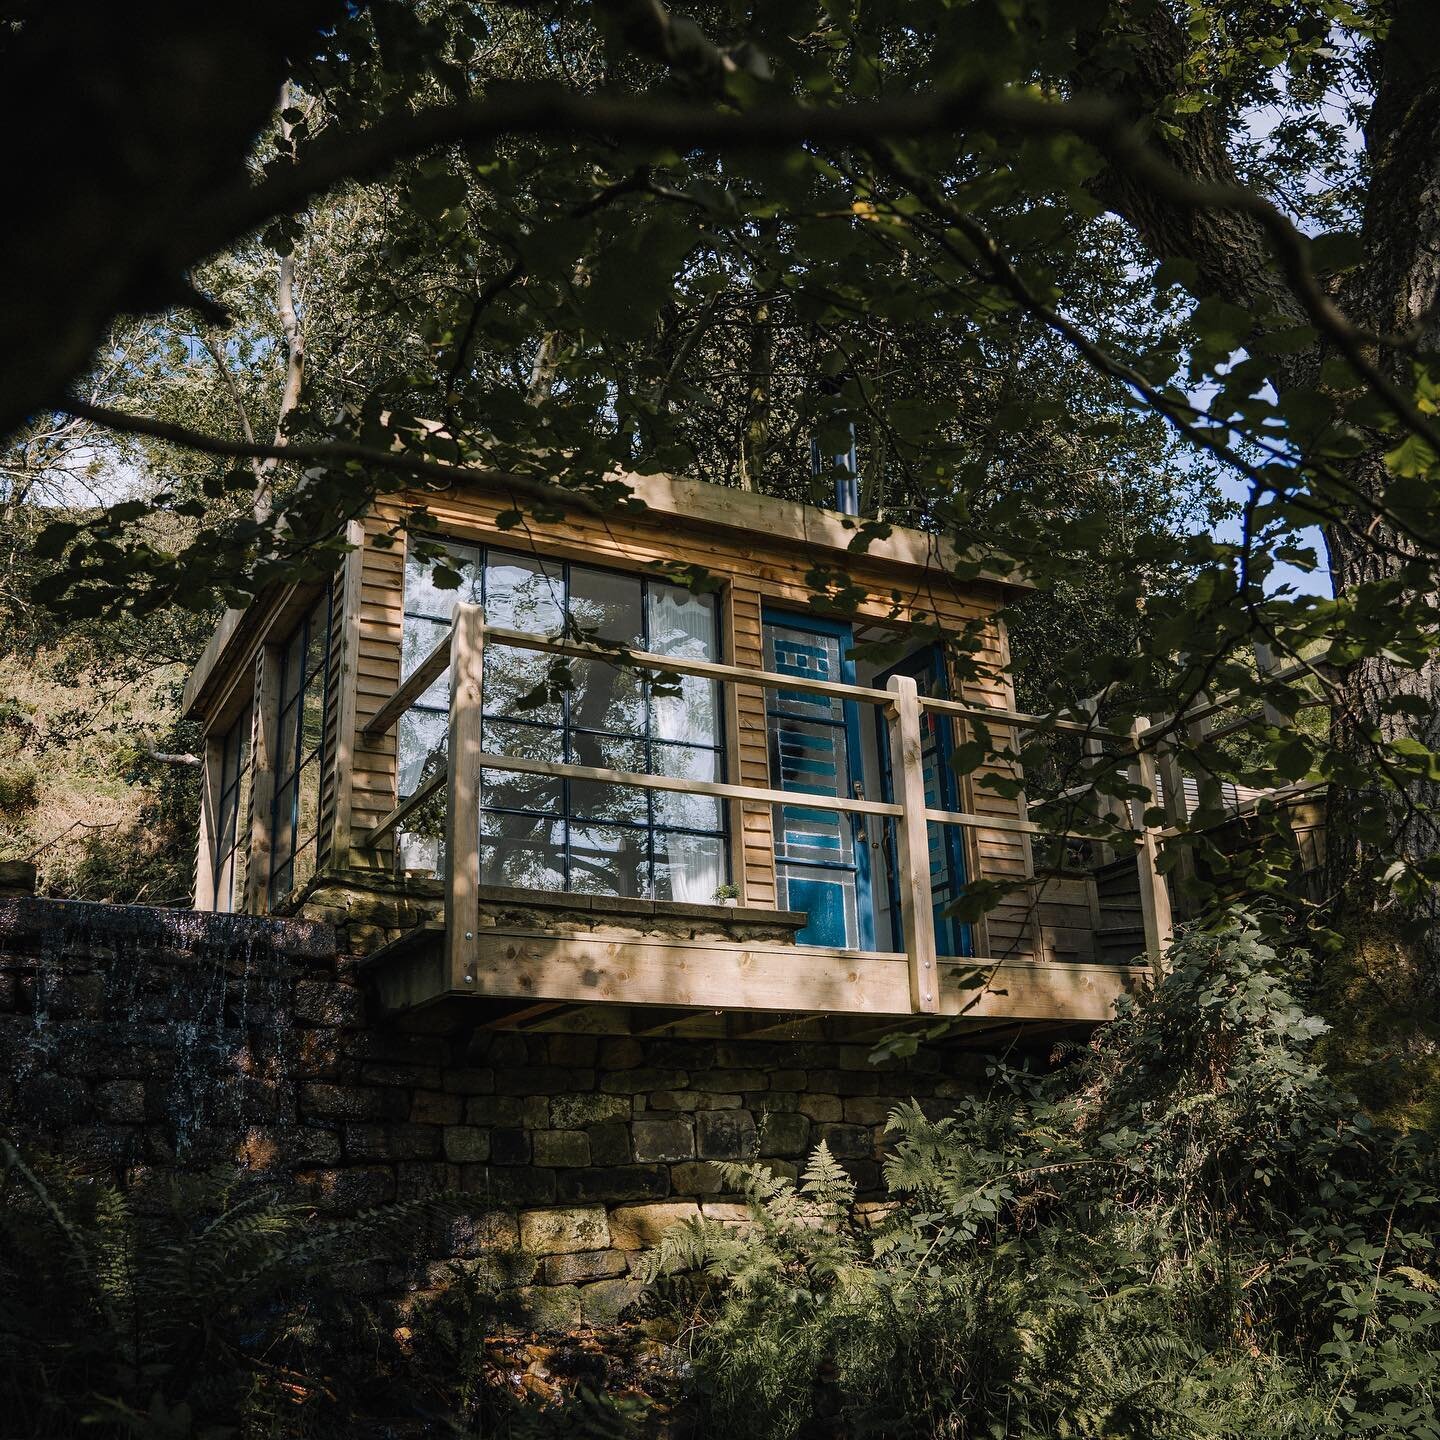 &ldquo;Falling water&rdquo; a little hidden Yorkshire cabin for the both of you 🤍 included in our wedding package...DM for details 
@glixphotography_weddings 

#weddingfood #styleinspo #weddingstyle #weddingstyling #newweddingvenue #rusticwedding #v